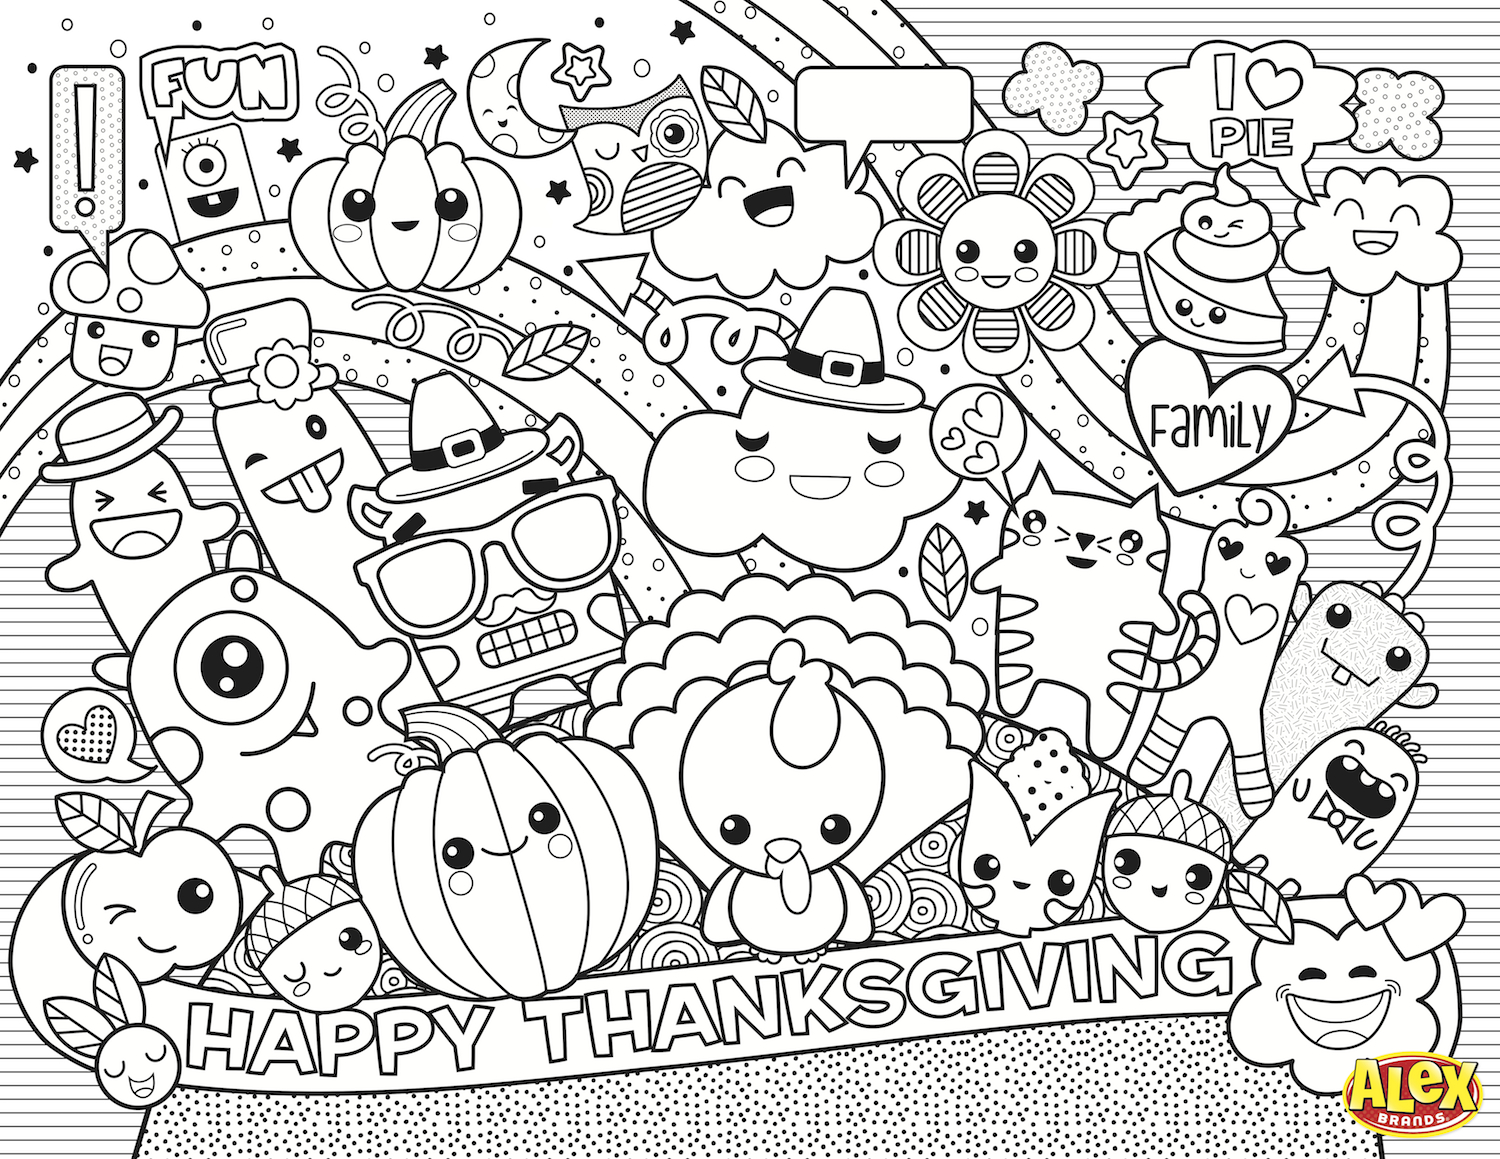 225+ Free Thanksgiving Printables And Coloring Pages For Kids - Free Printable Thanksgiving Coloring Placemats